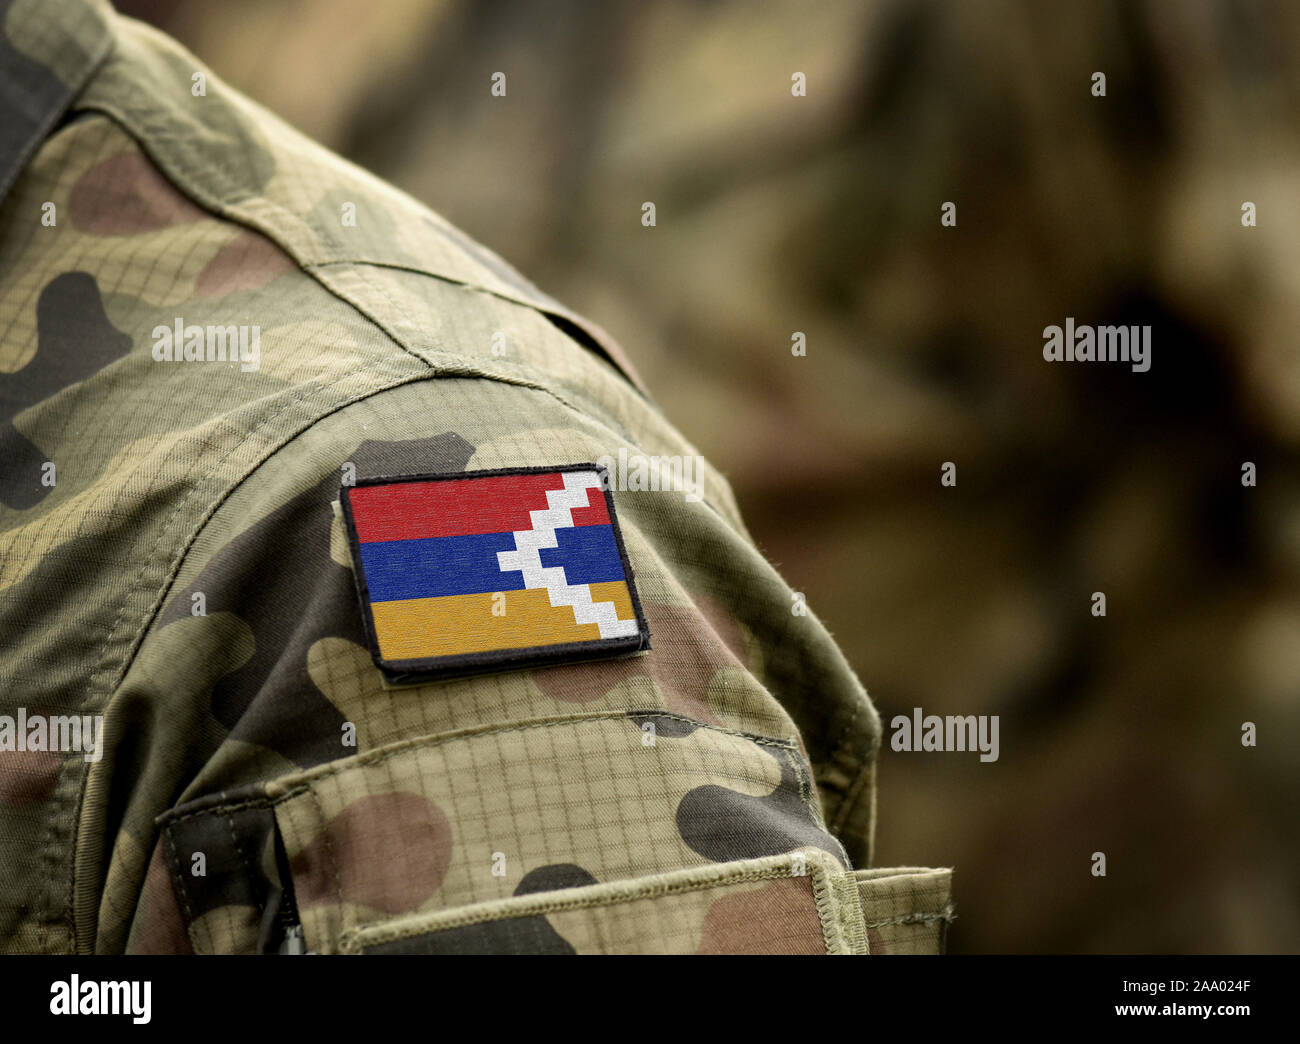 Flag of Artsakh on military uniform. Flag of the Republic of Artsakh and also known as Nagorno-Karabakh Republic on soldiers arm. Army, armed forces, Stock Photo